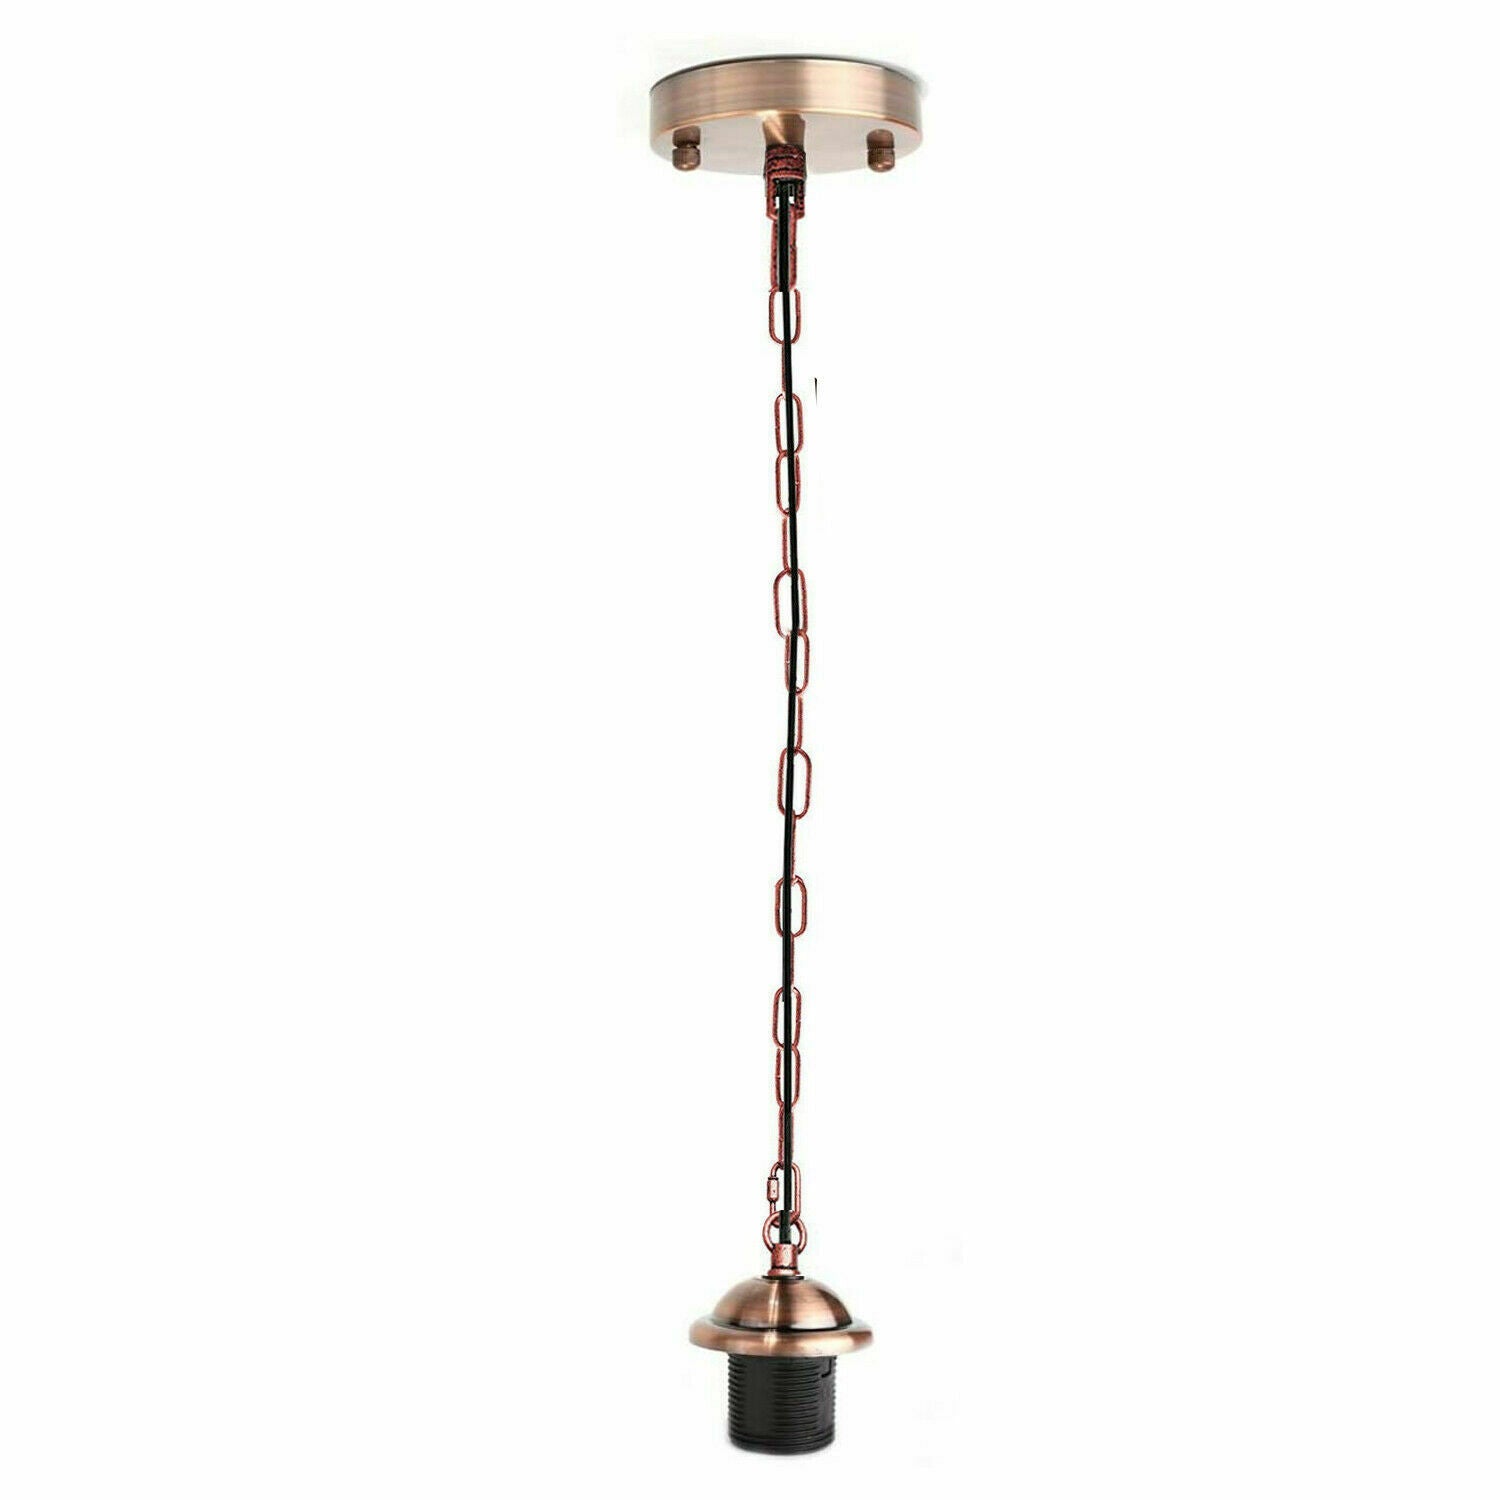 copper Metal Ceiing E27 Lamp Holder Pendant Light With Chain